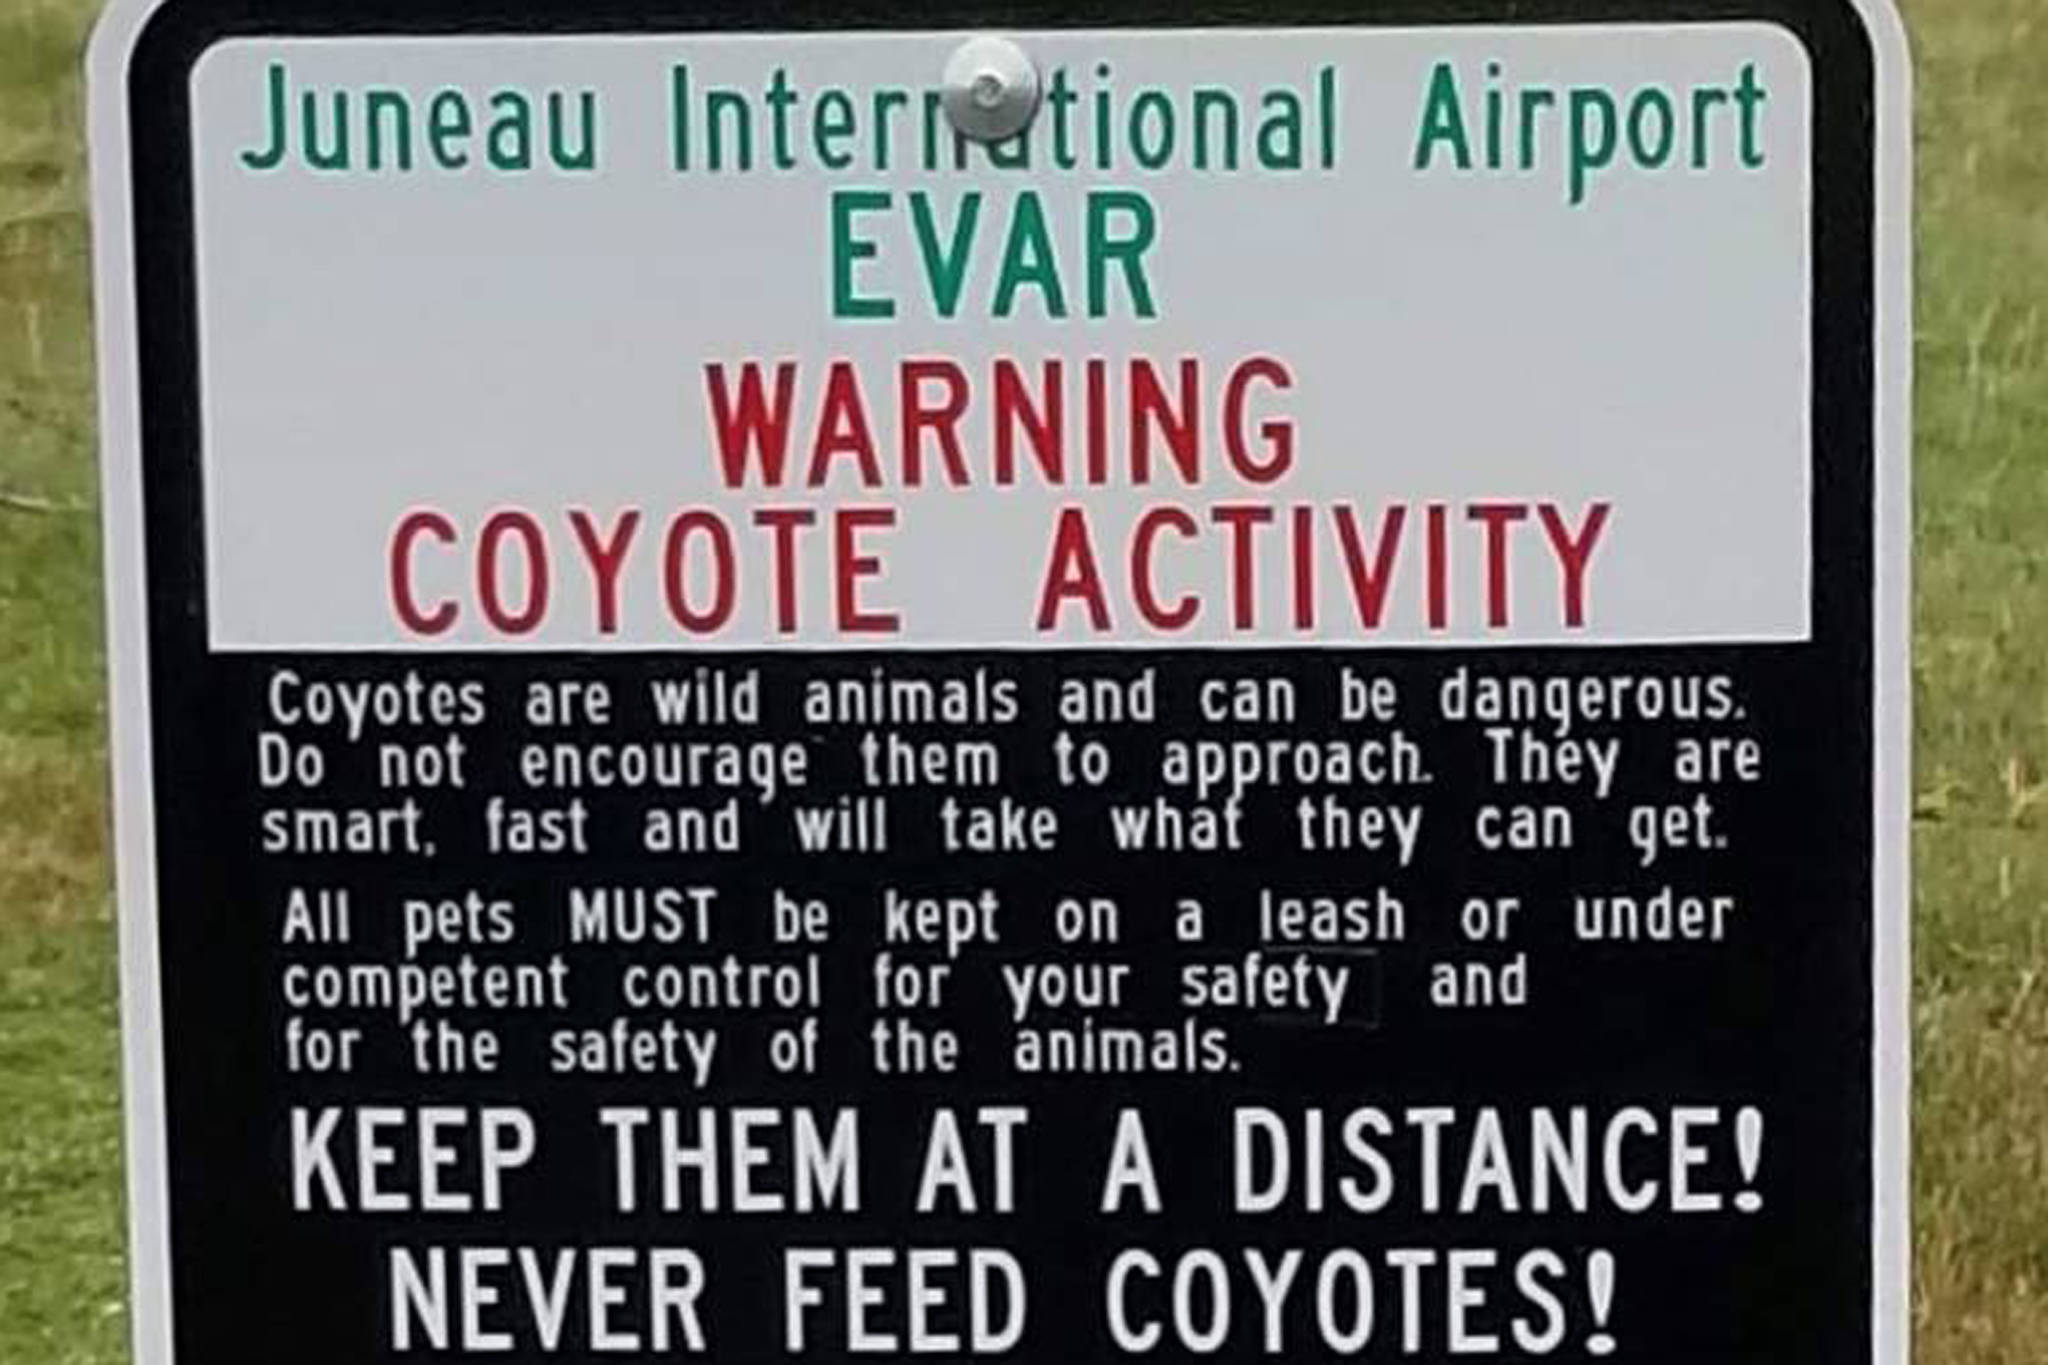 Yes, that Wile E. Coyote airport sign is real